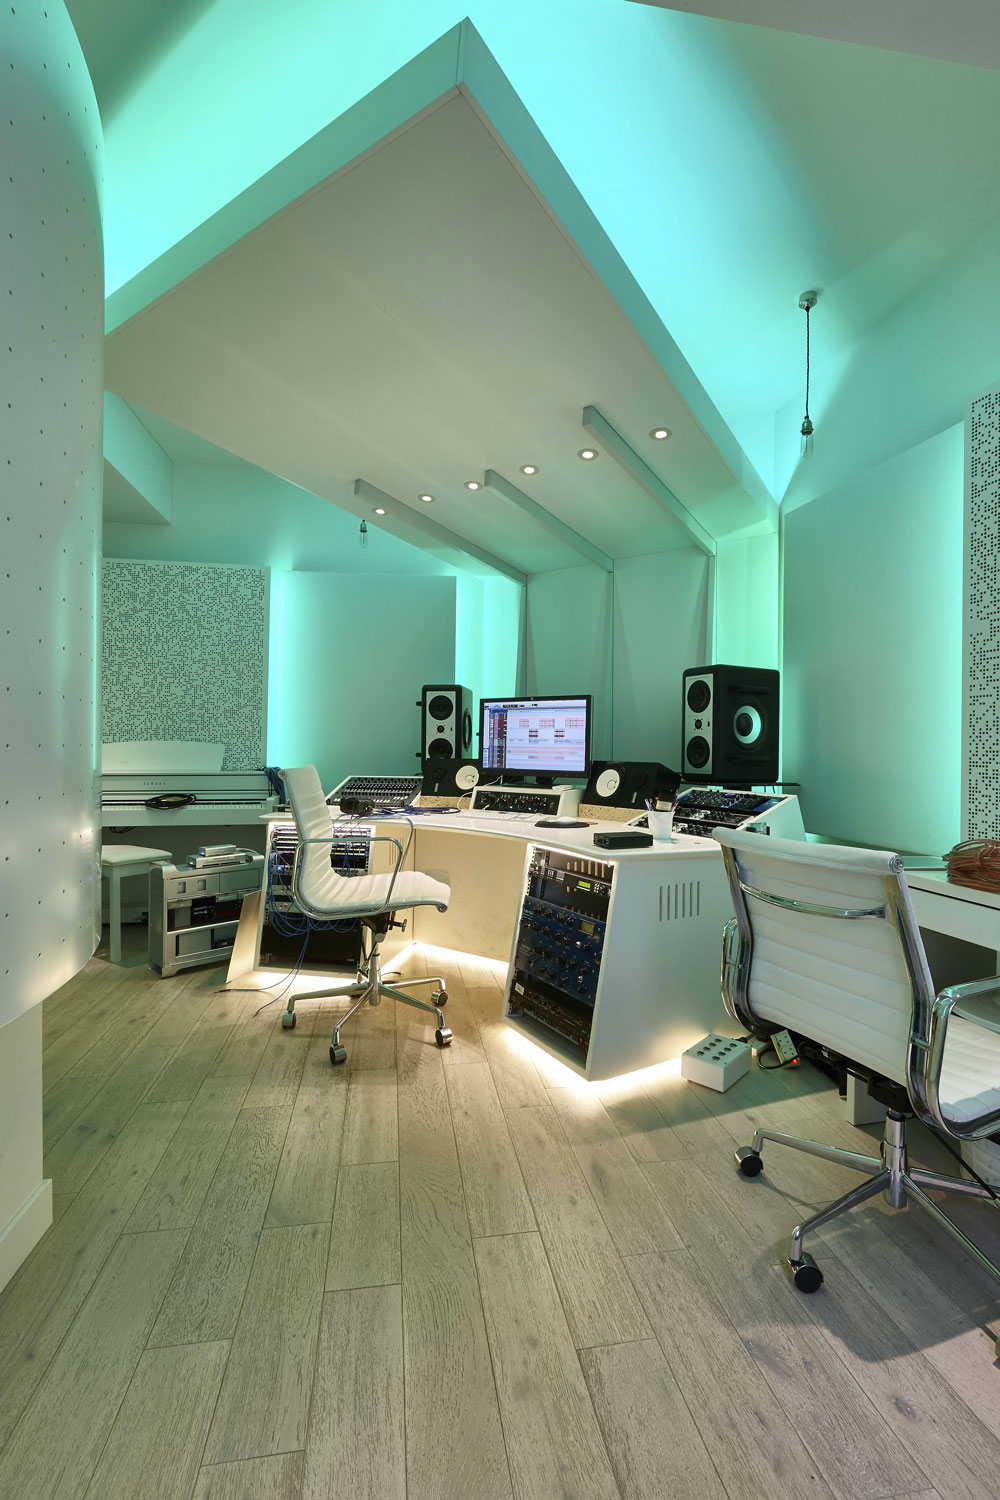 Studio 3, The Church Recording Studio, formerly owned by Dave Stewart of the Eurythmics | Interior Photography London